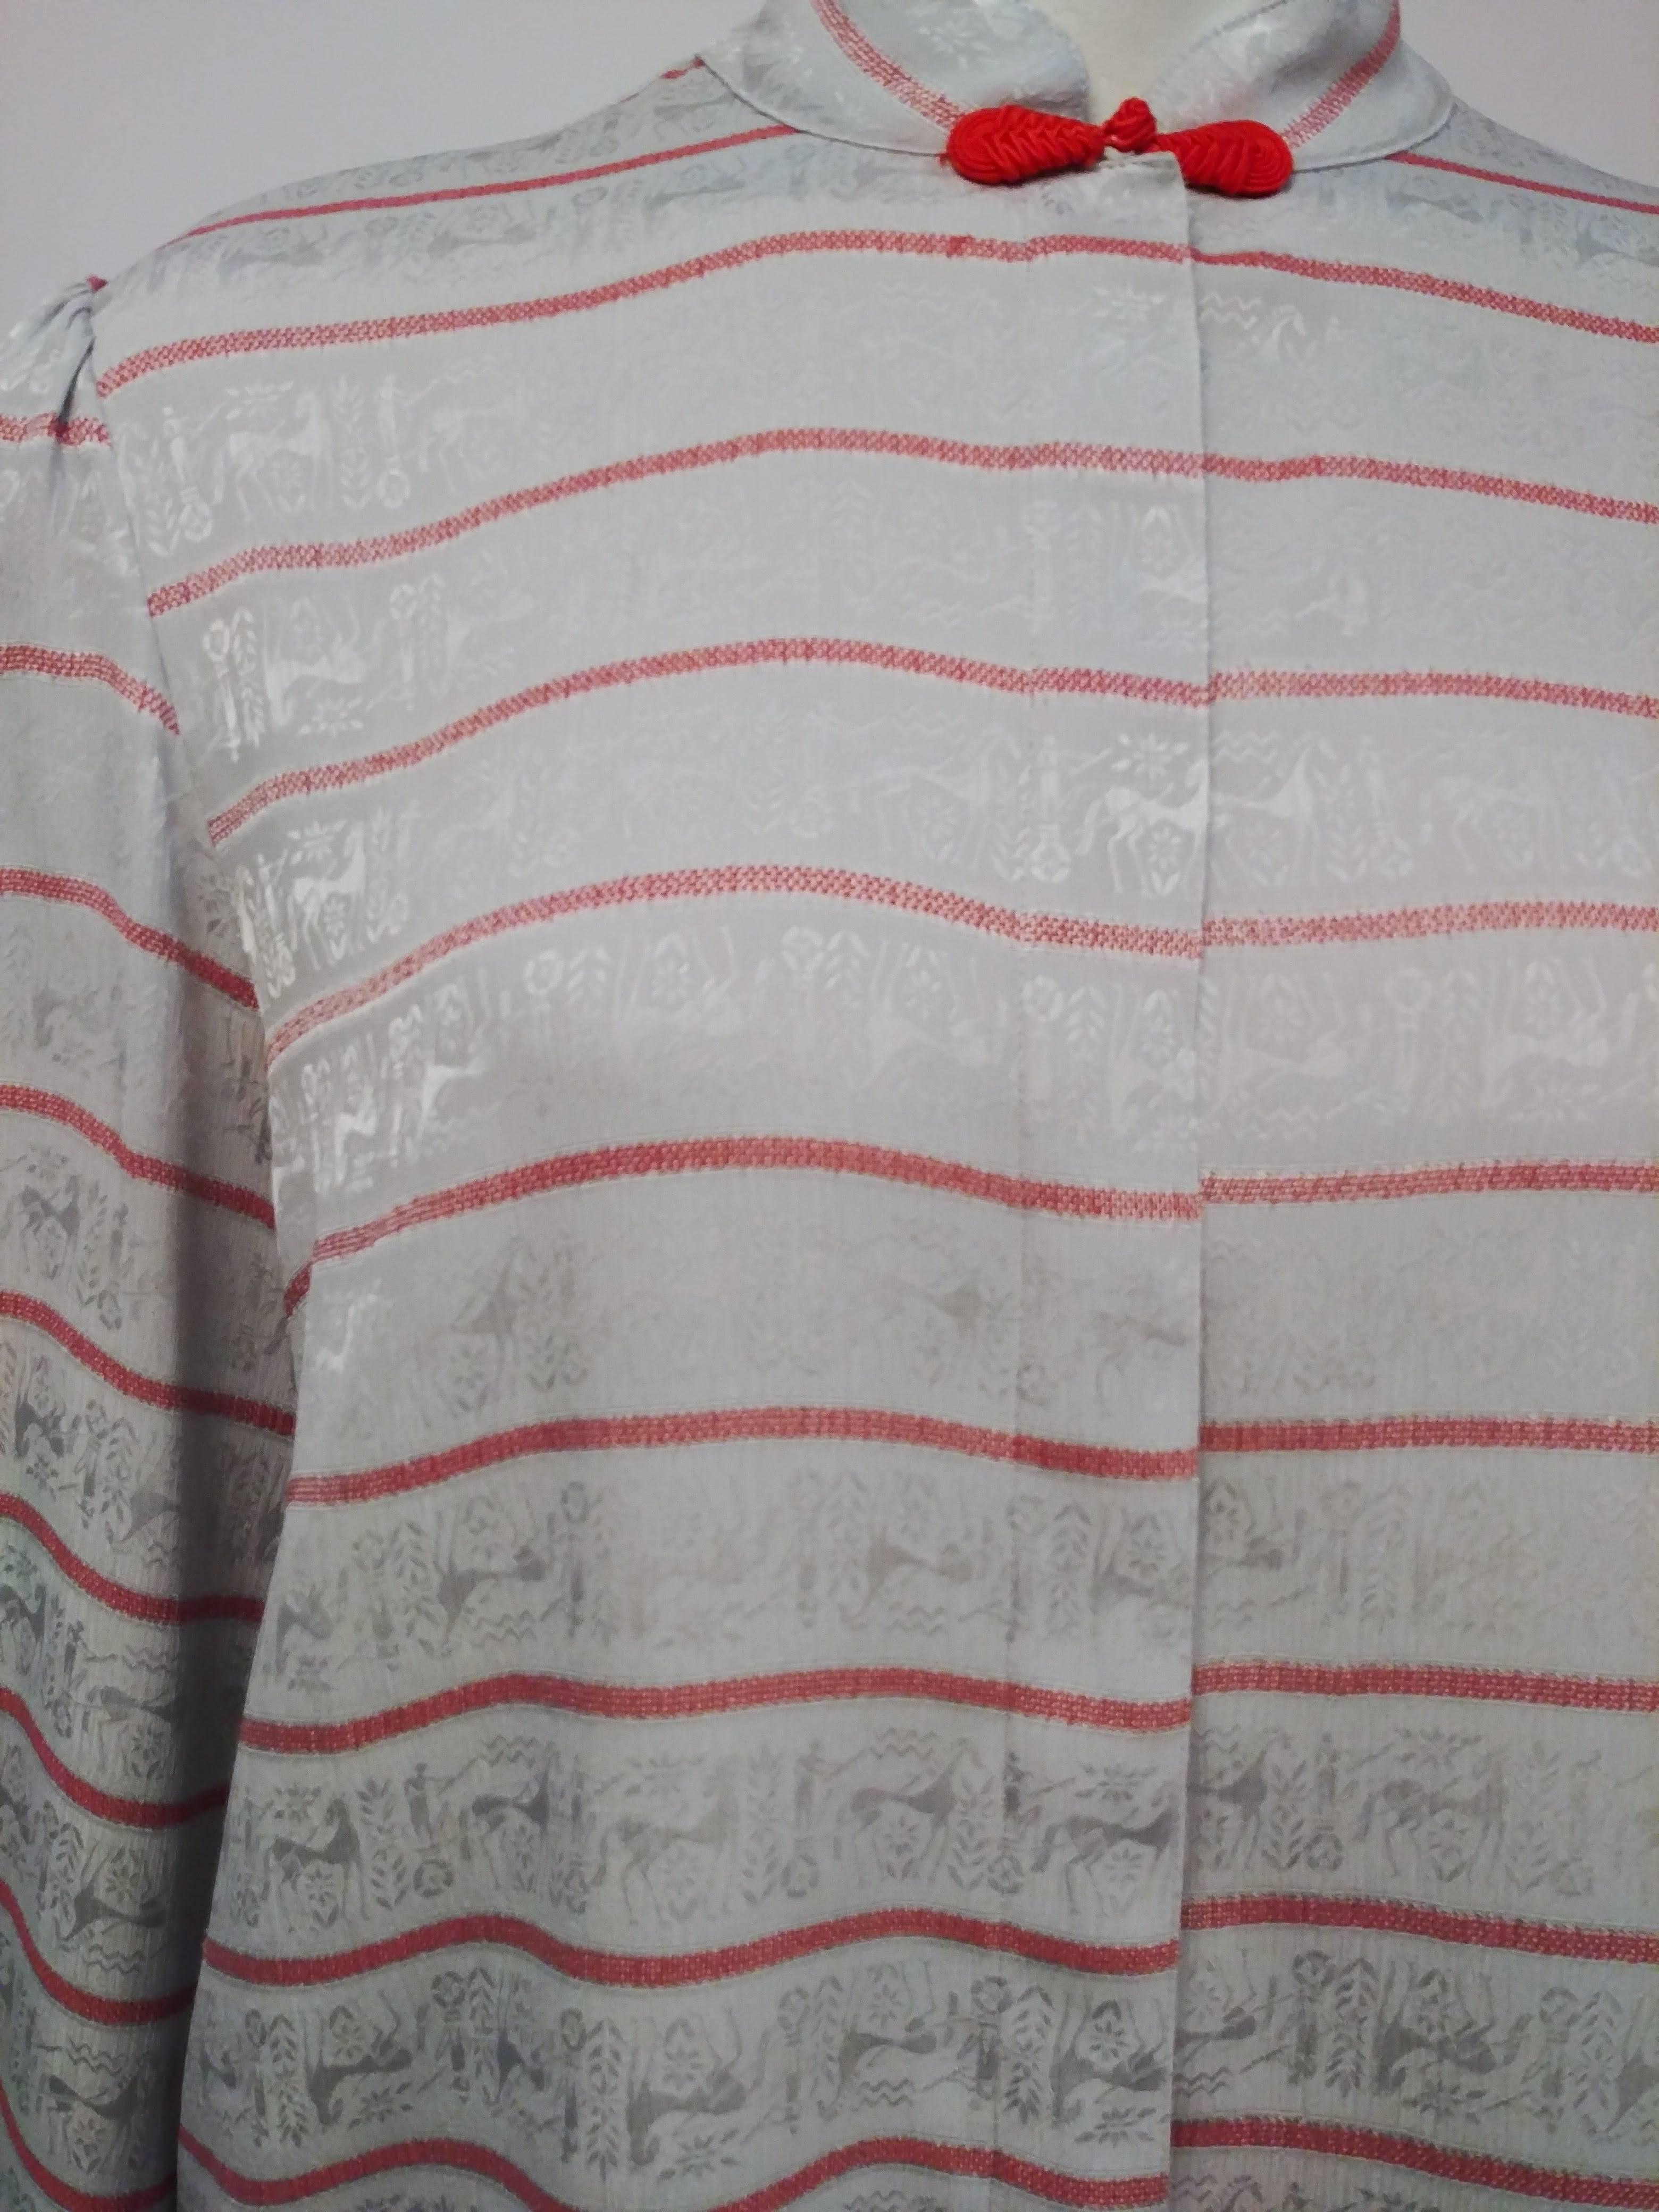 1980s Silk Jacquard Silver Blouse w/ Mesopotamian Motifs. Silver fabric with red stripes with Mesopotamian designs woven into fabric. Red frog clasp at neck, hidden button placket. Unlined, slightly padded shoulders for a puffed sleeve look. 